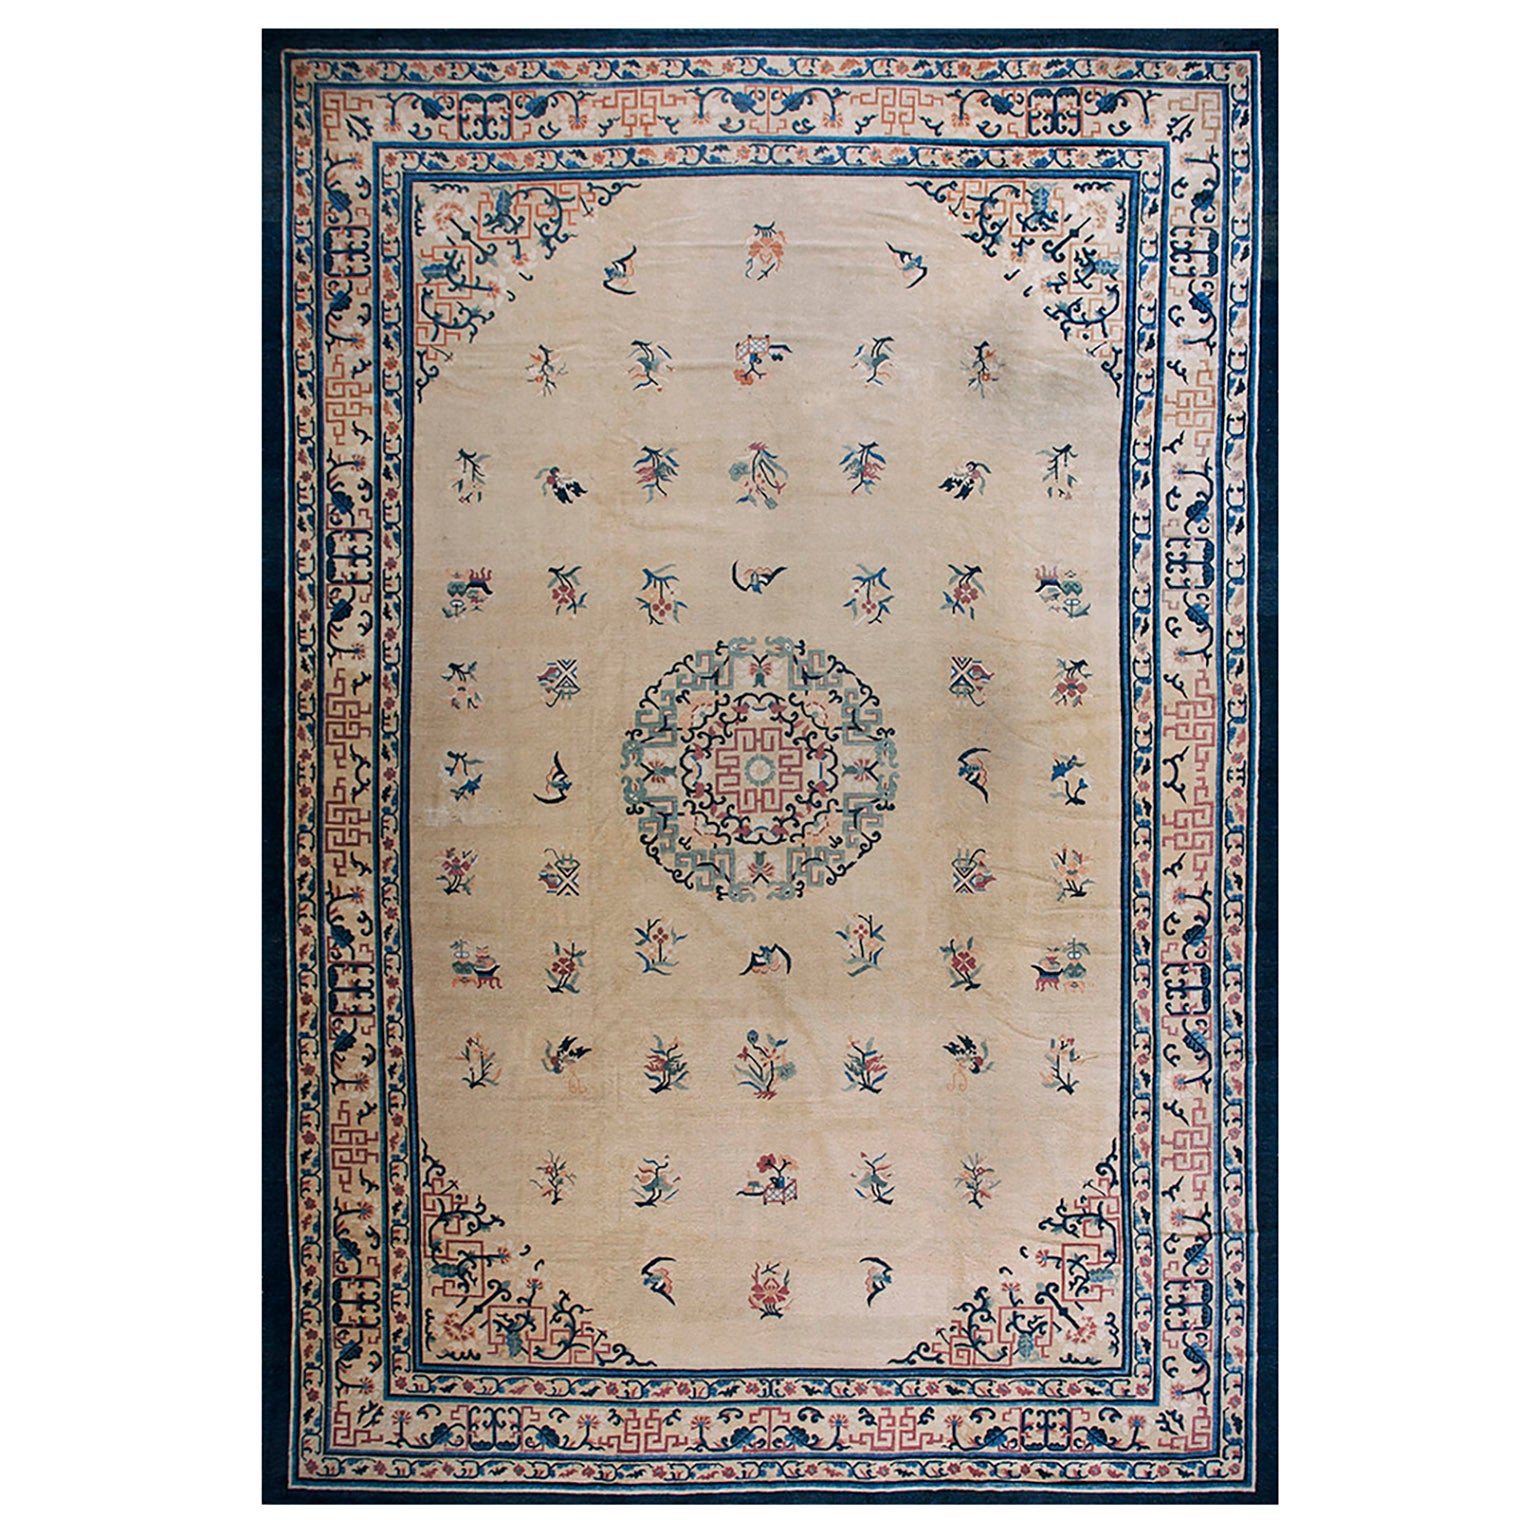 Early 20th Century Chinese Peking Carpet ( 12' x 17' 6'' - 366 x 533 ) For Sale